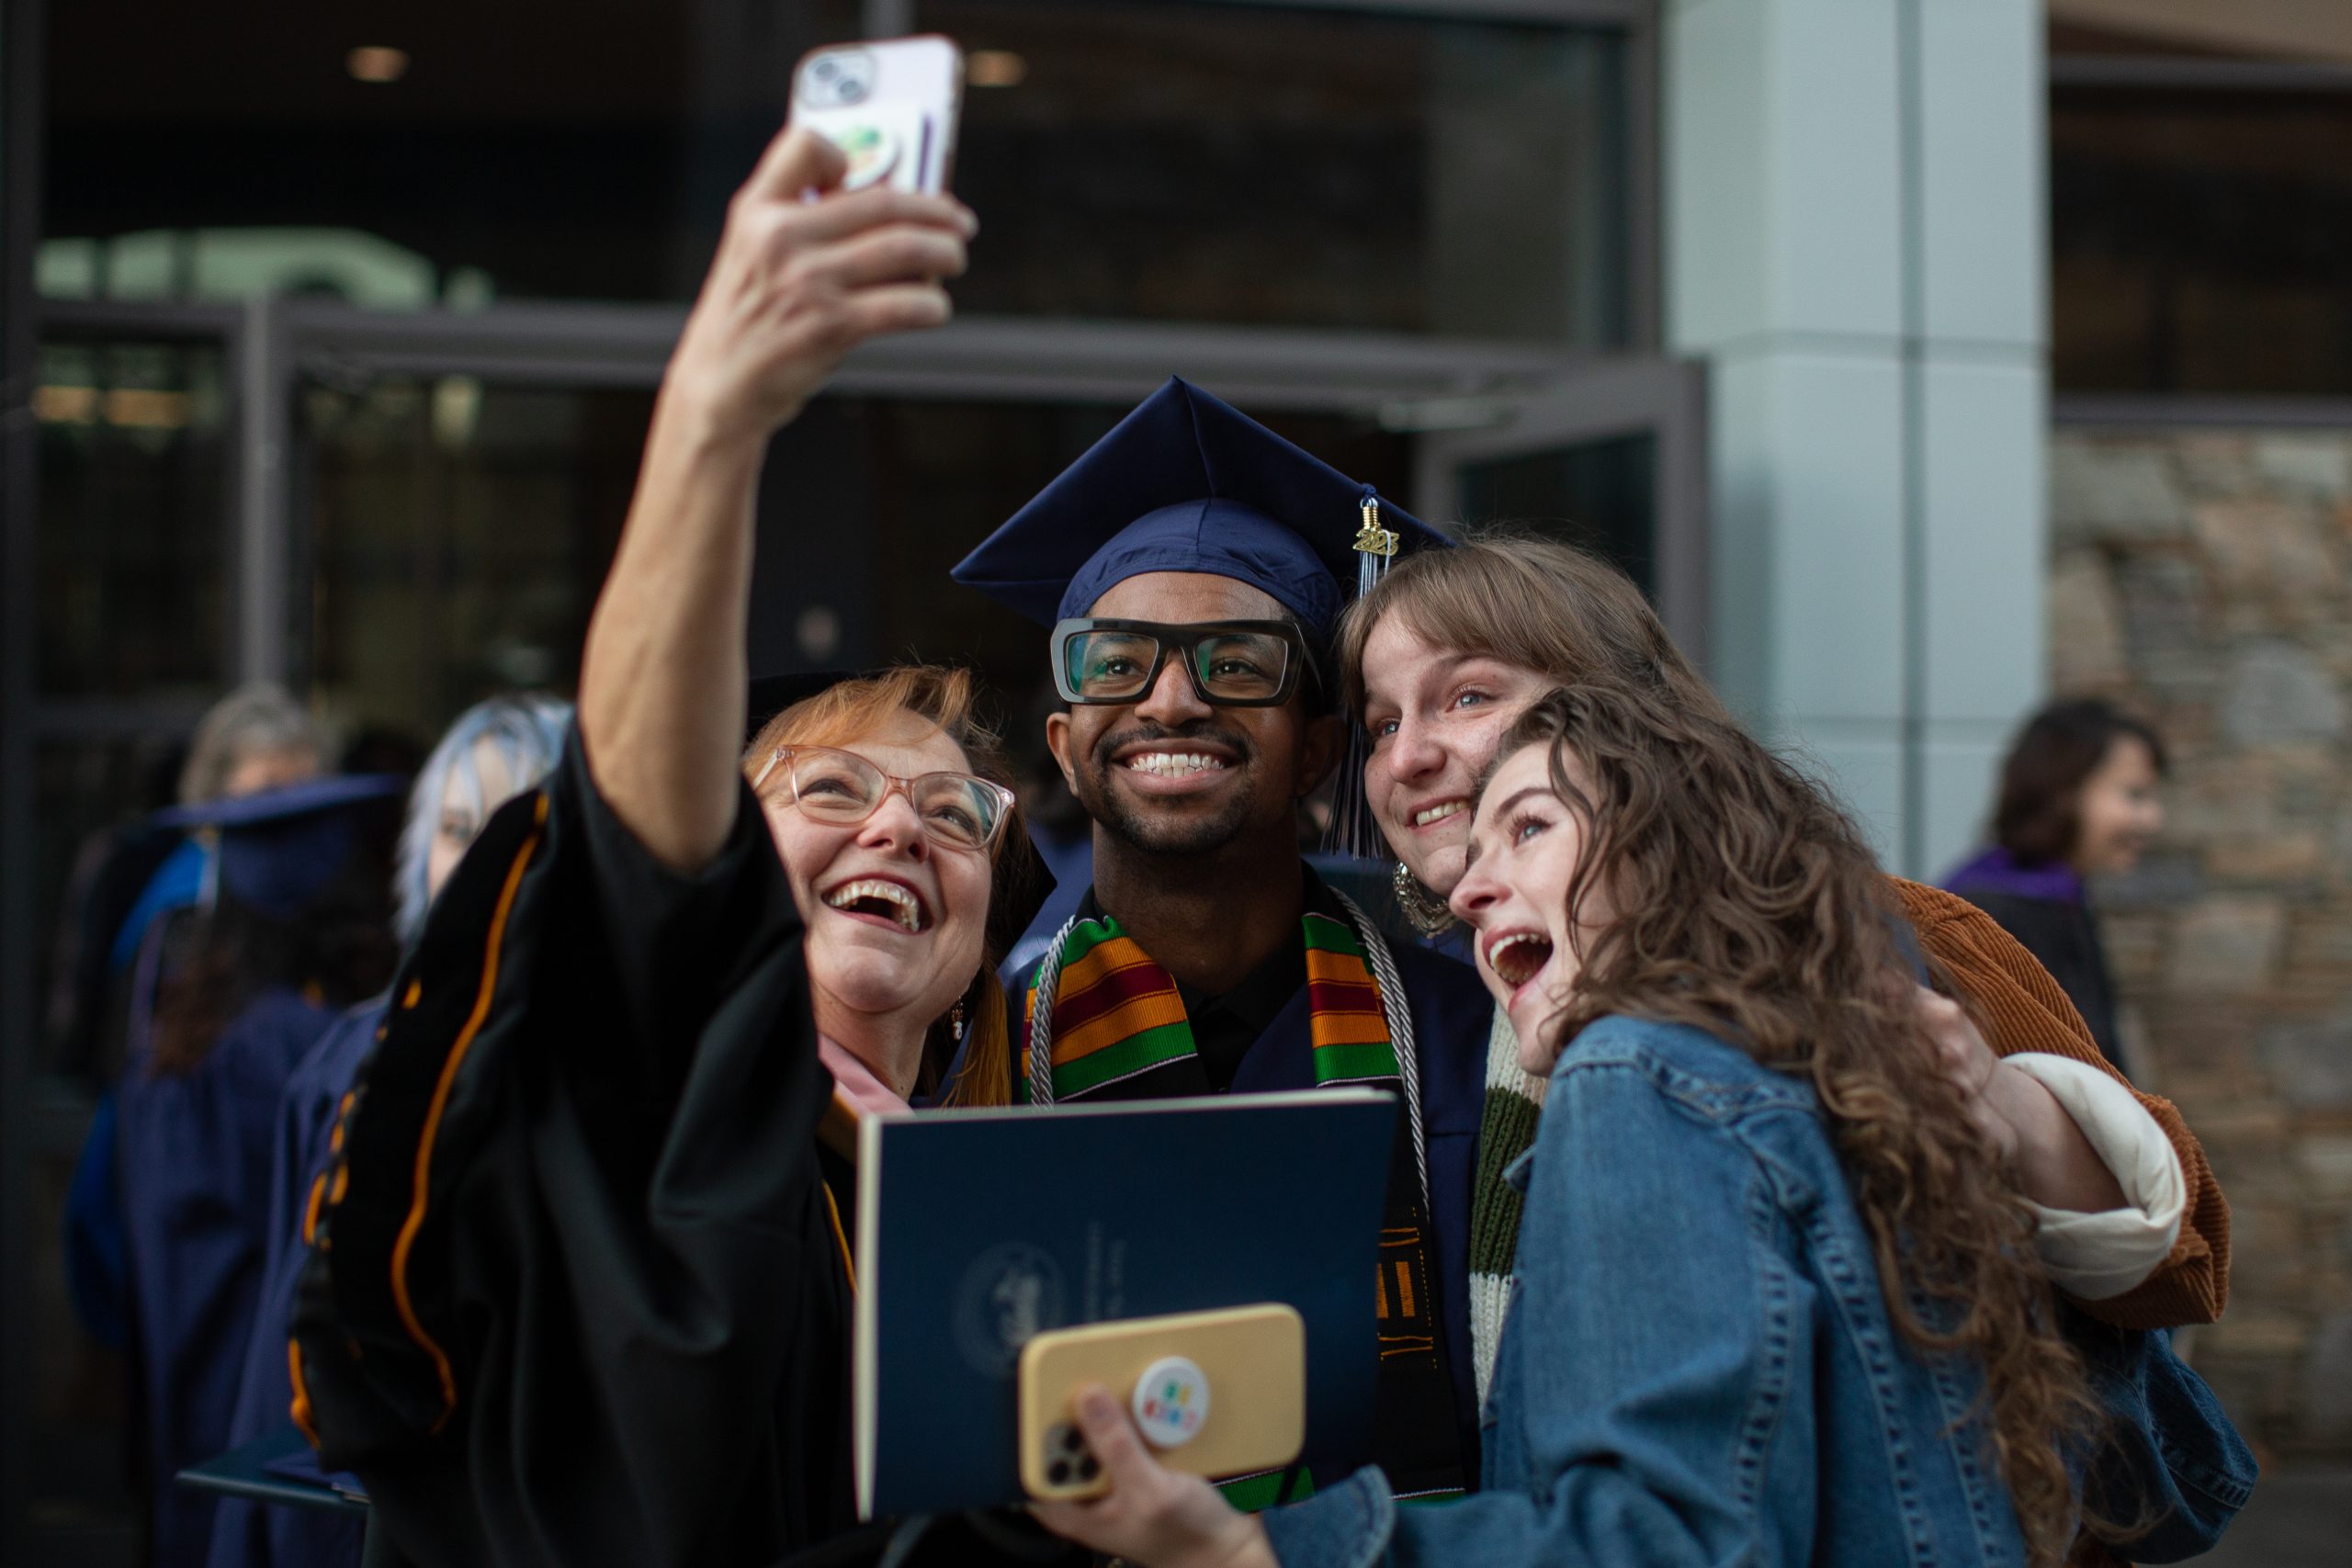 Some people taking a photo with a graduate outside Kimmel Arena after commencement